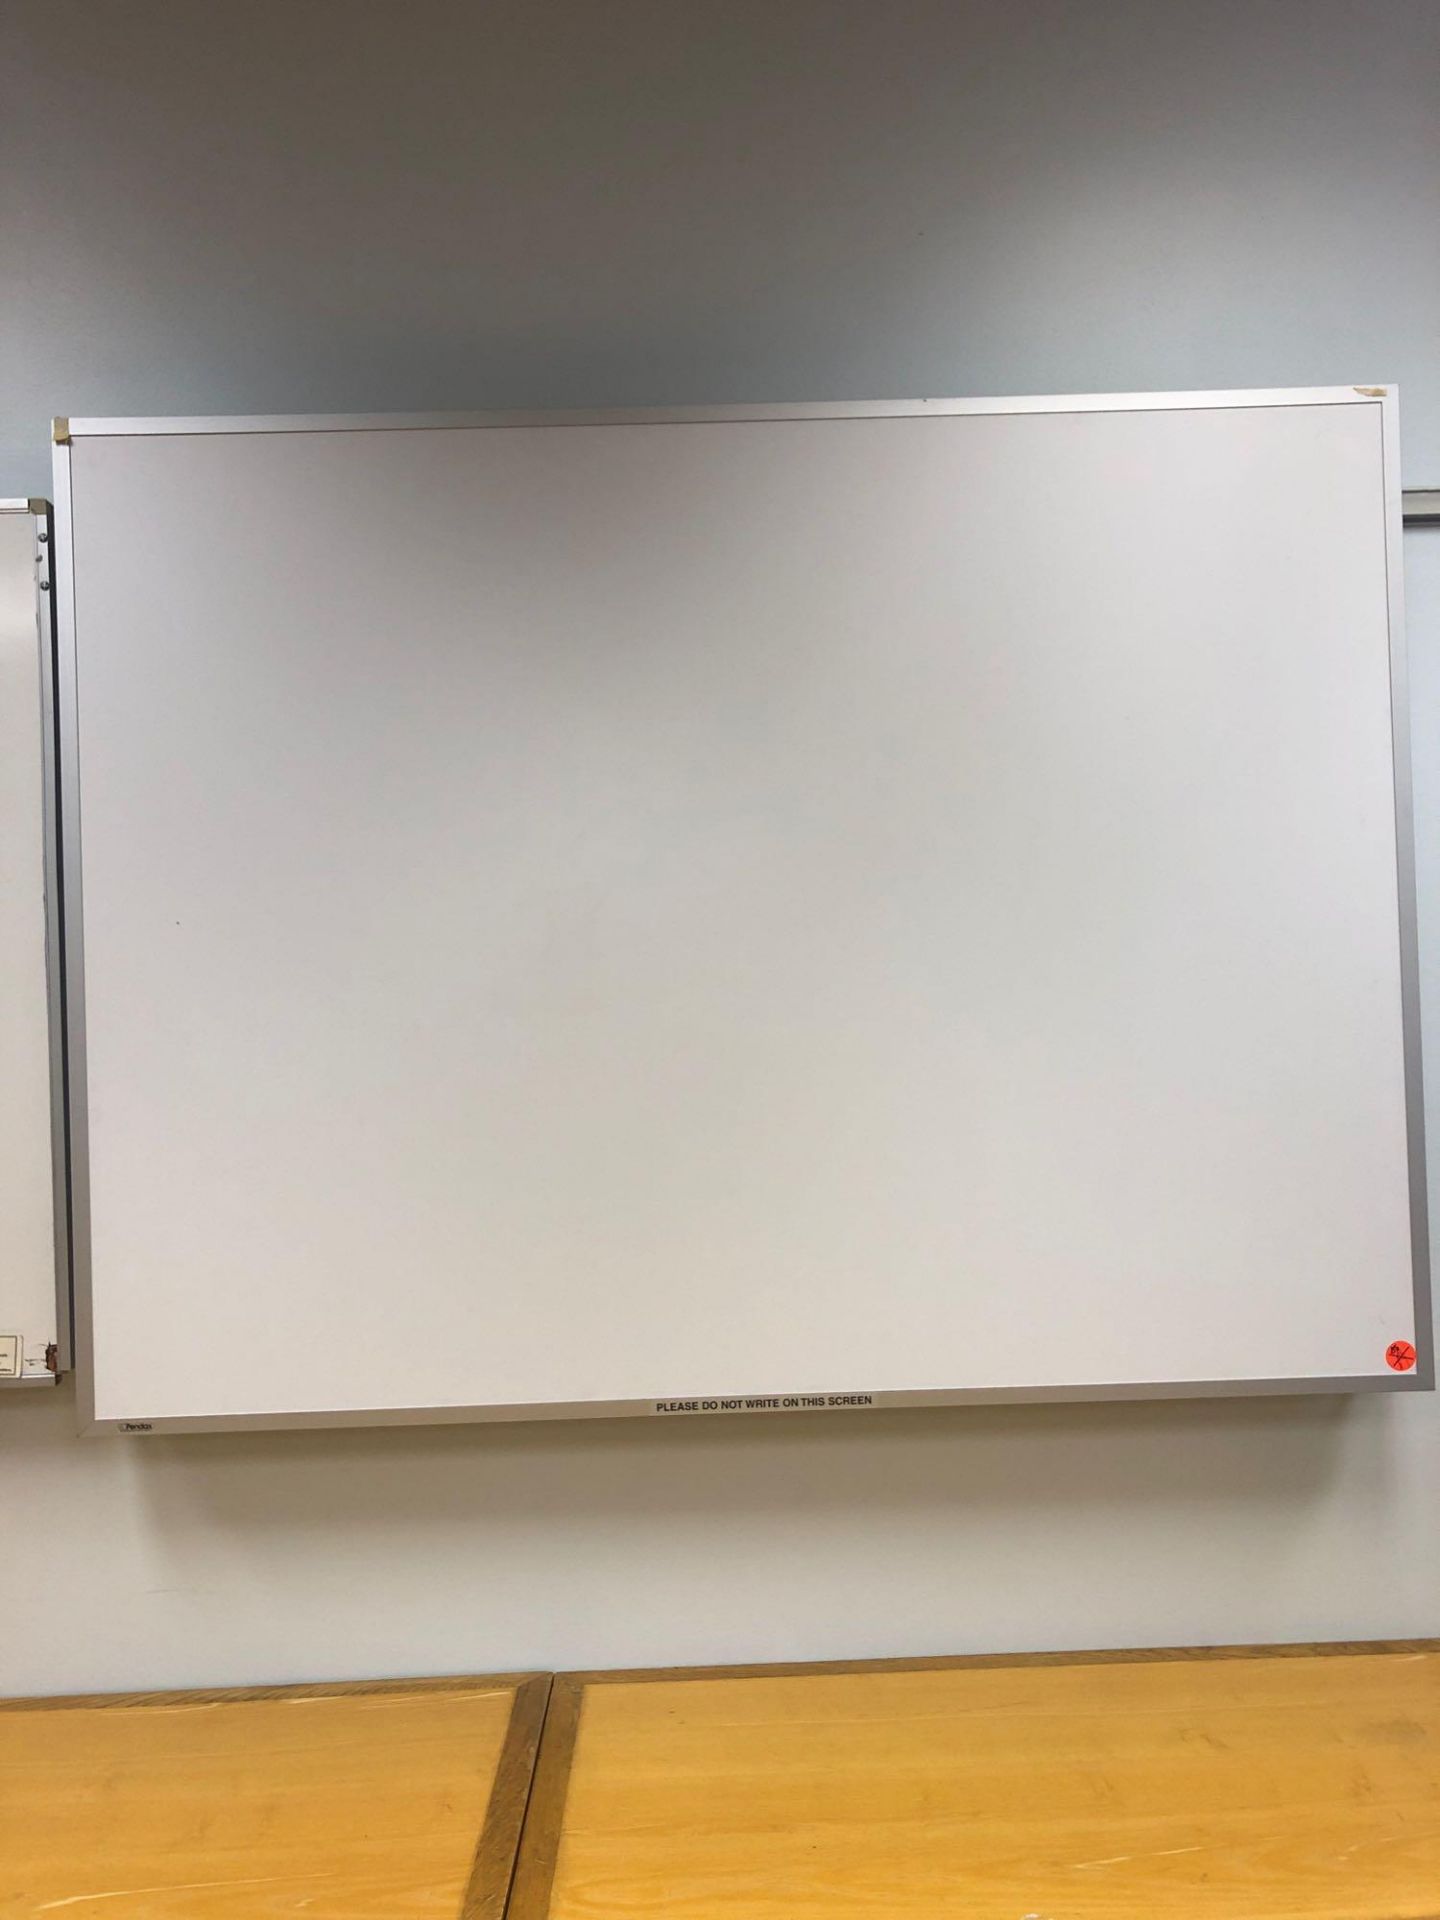 Pendax White Screen 1800 X 1350 Mm One Wall Mounted Whiteboard And One Whiteboard/Flipchart Stand